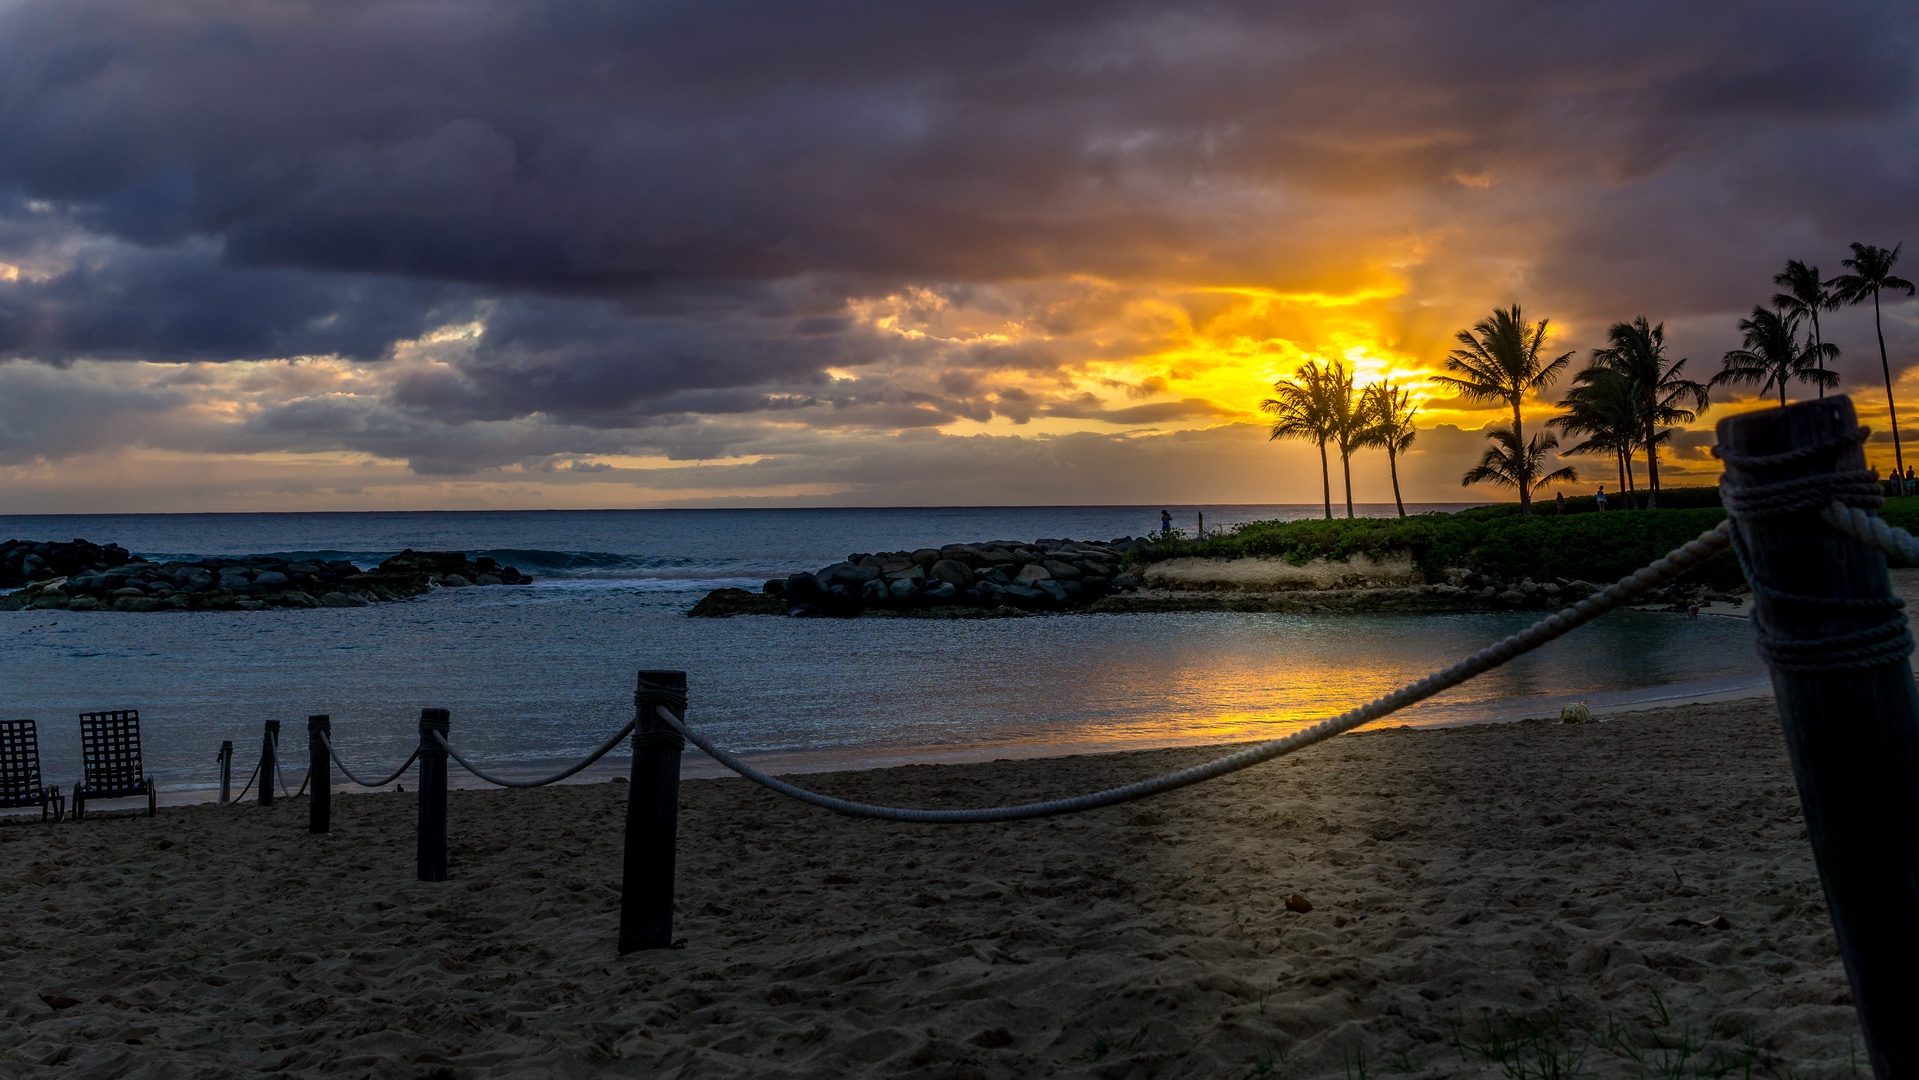 Kapolei Vacation Rentals, Ko Olina Kai 1033A - The sunrises and sunsets at the ocean are a photographer's dream.